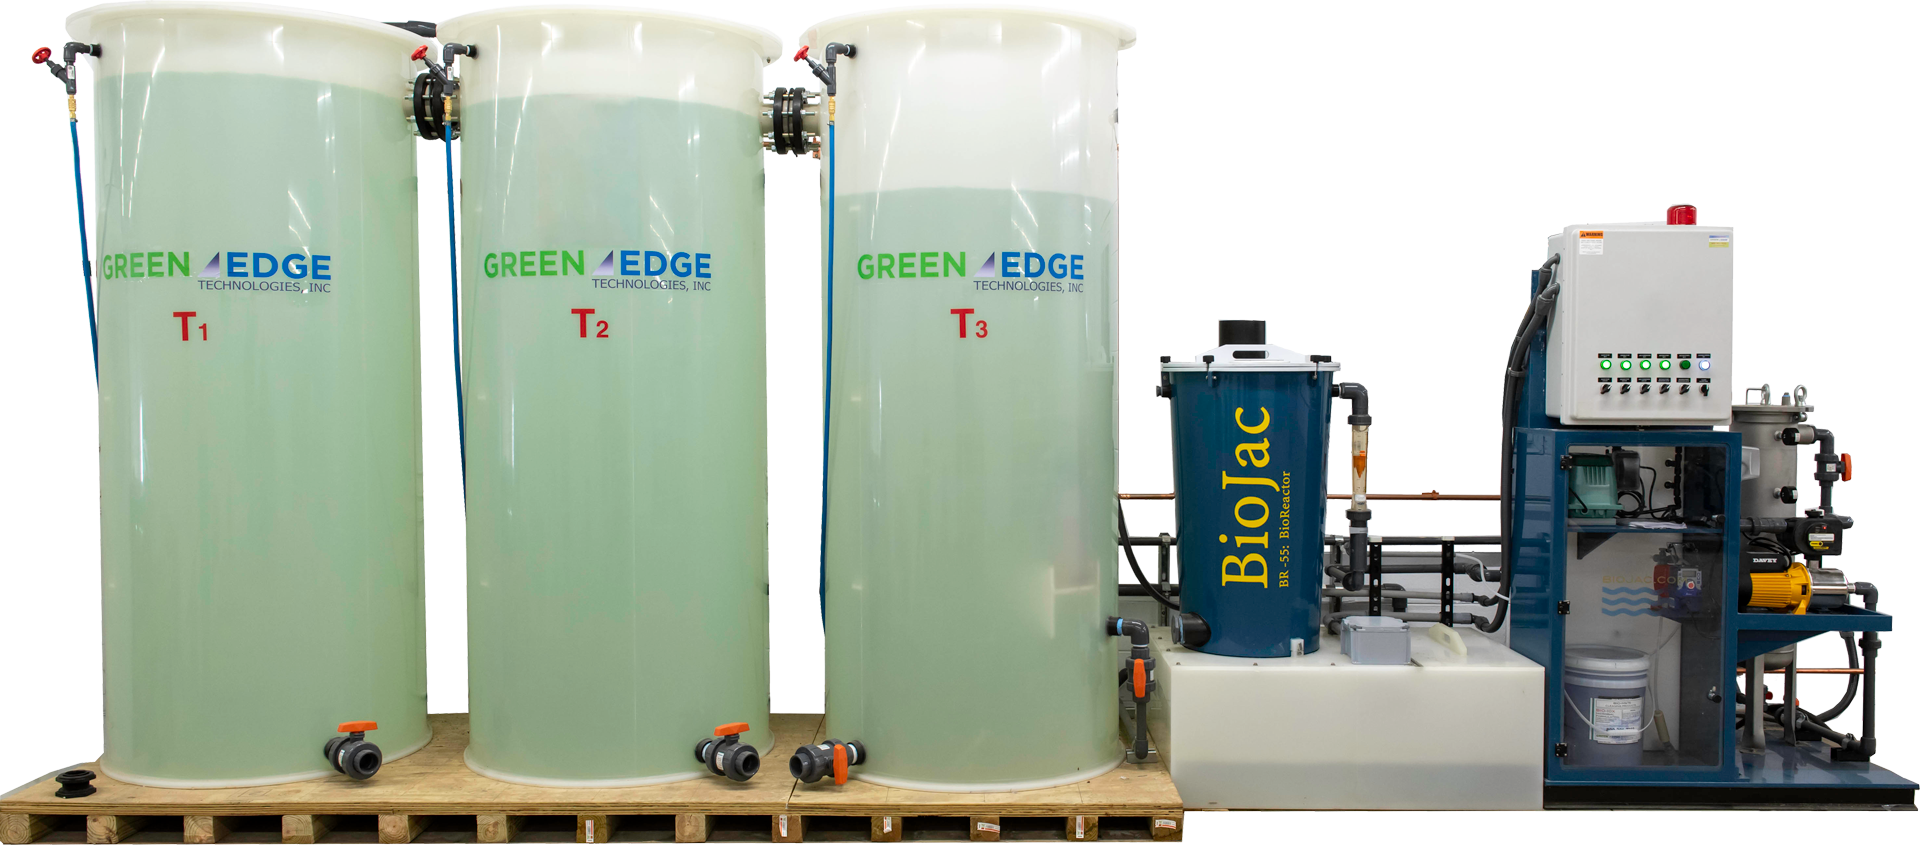 GreenEdge Technologies is a water reclamation company offering advanced systems for car washes and wash bays.